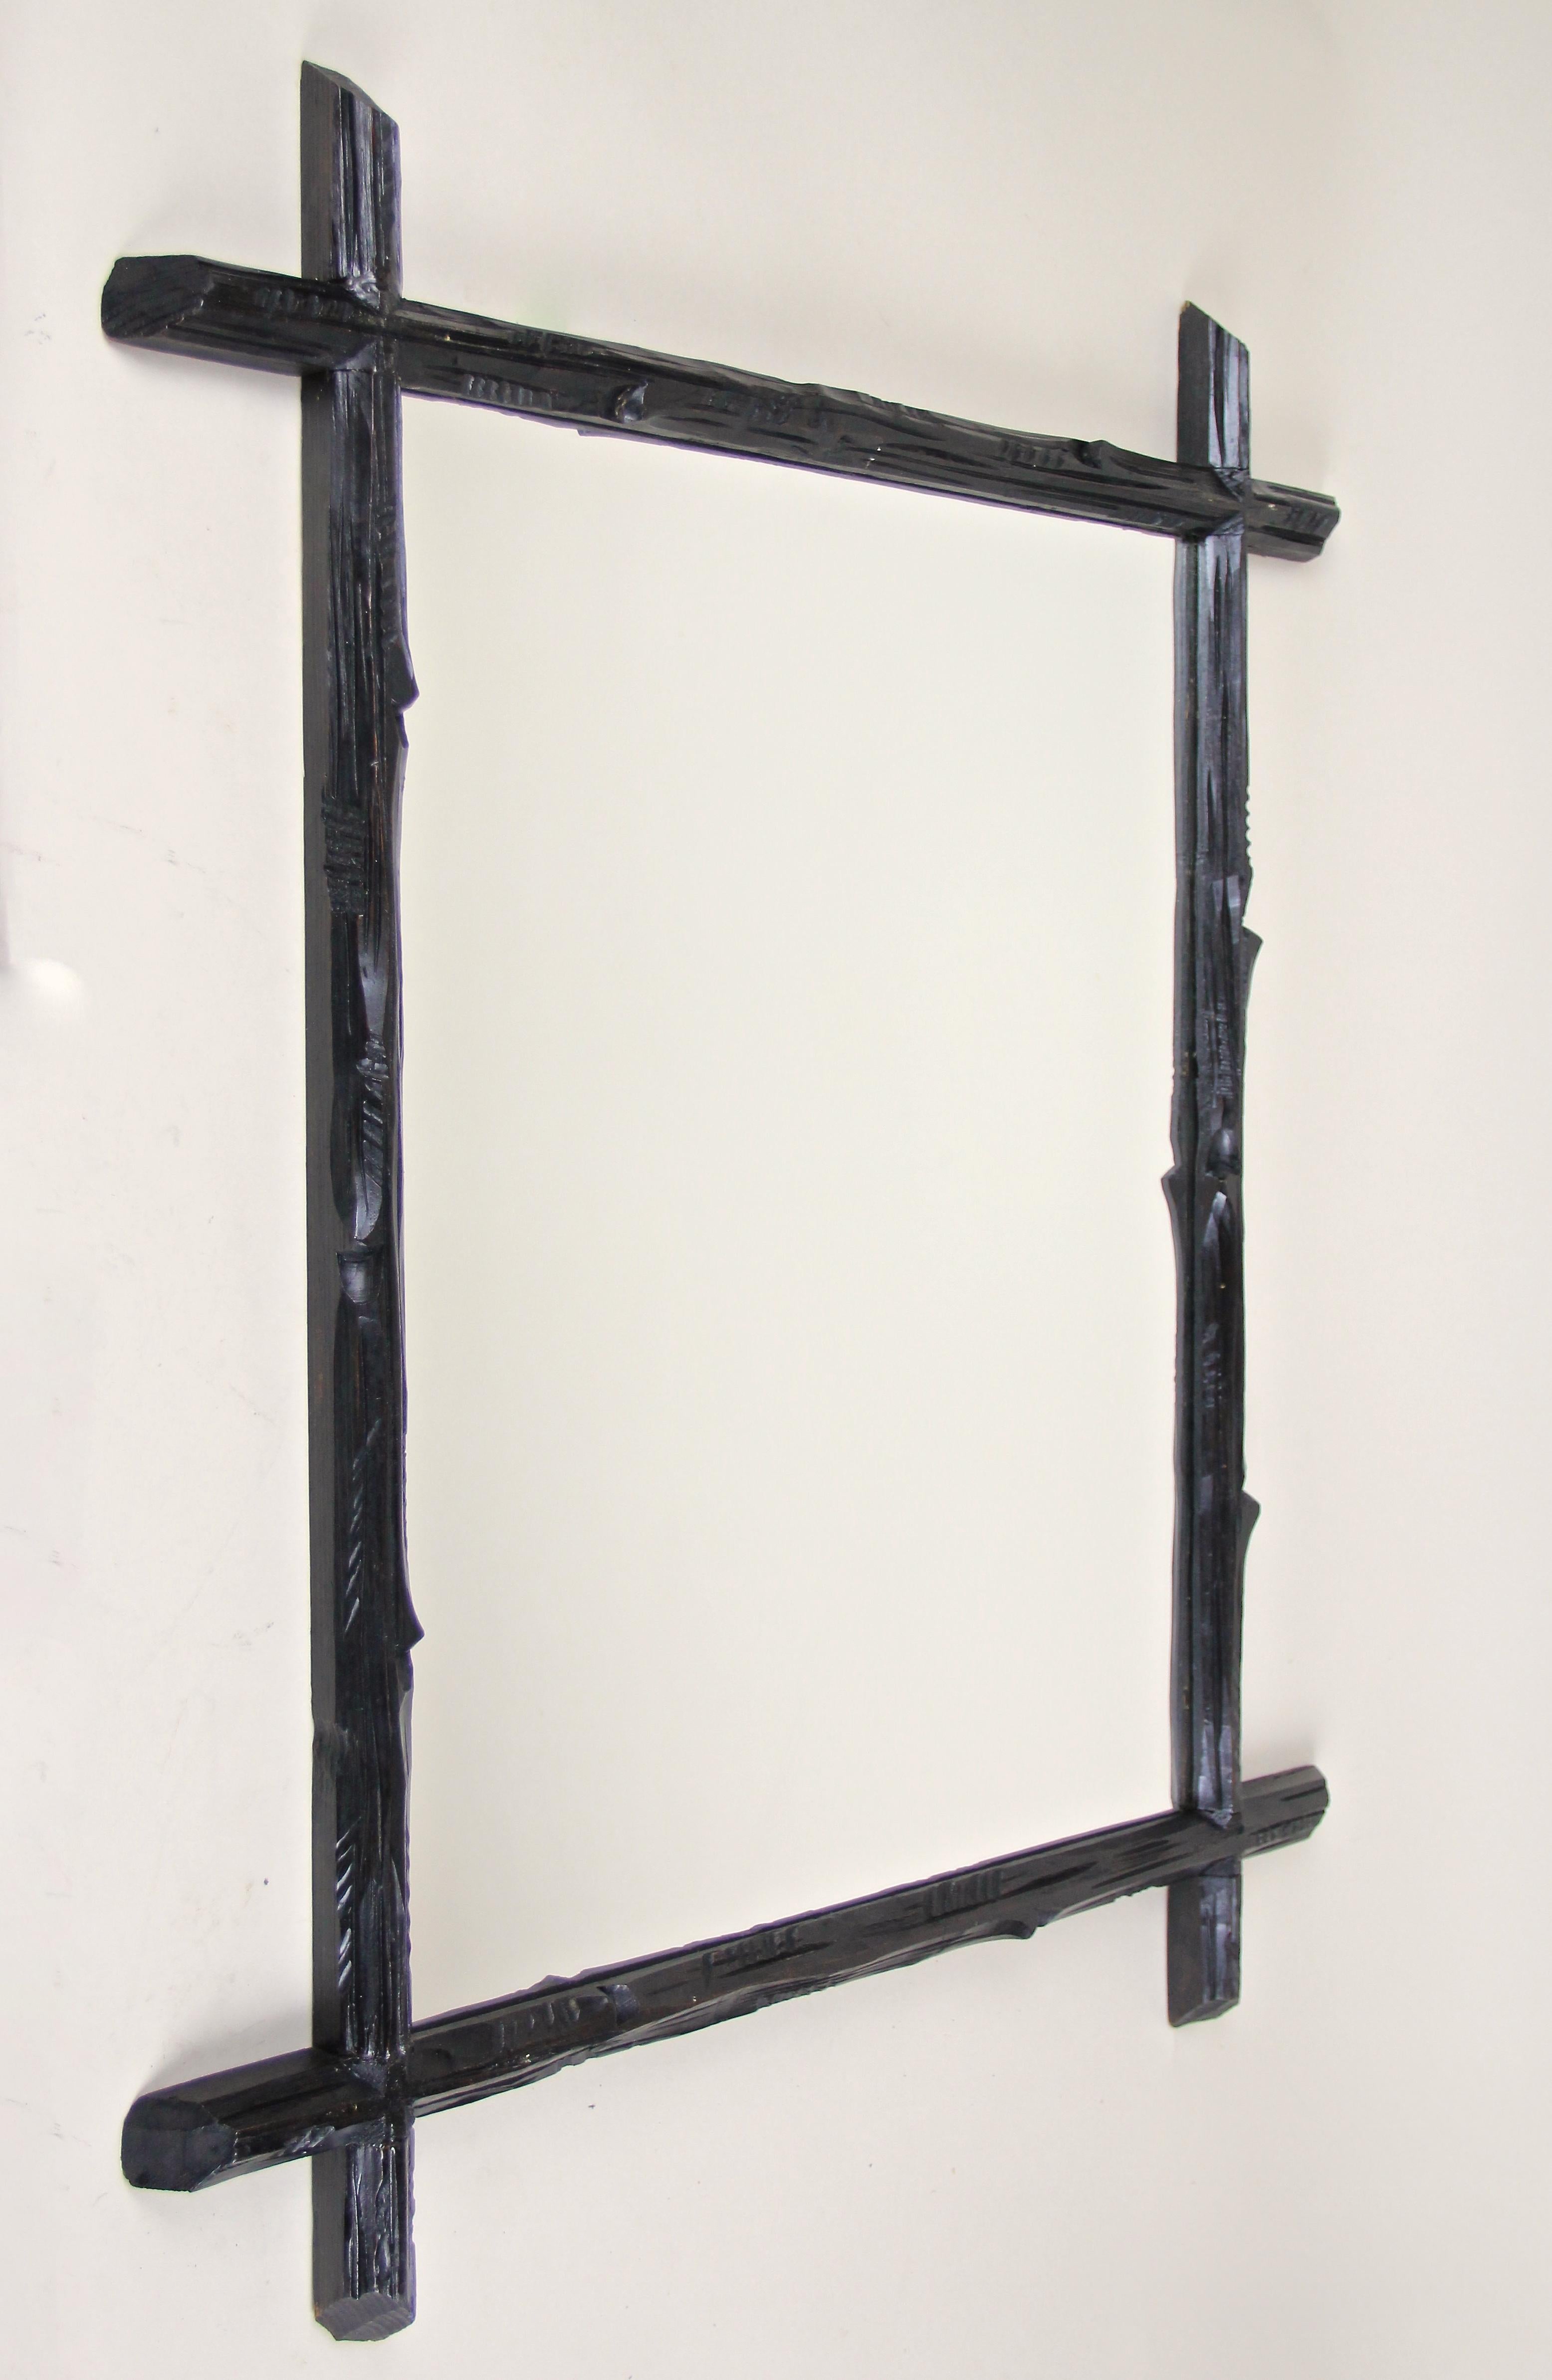 Decorative rustic Black Forest wall mirror from the late 19th century circa 1880 in Austria. A unique lovely hand carved frame impressing with an unusual 